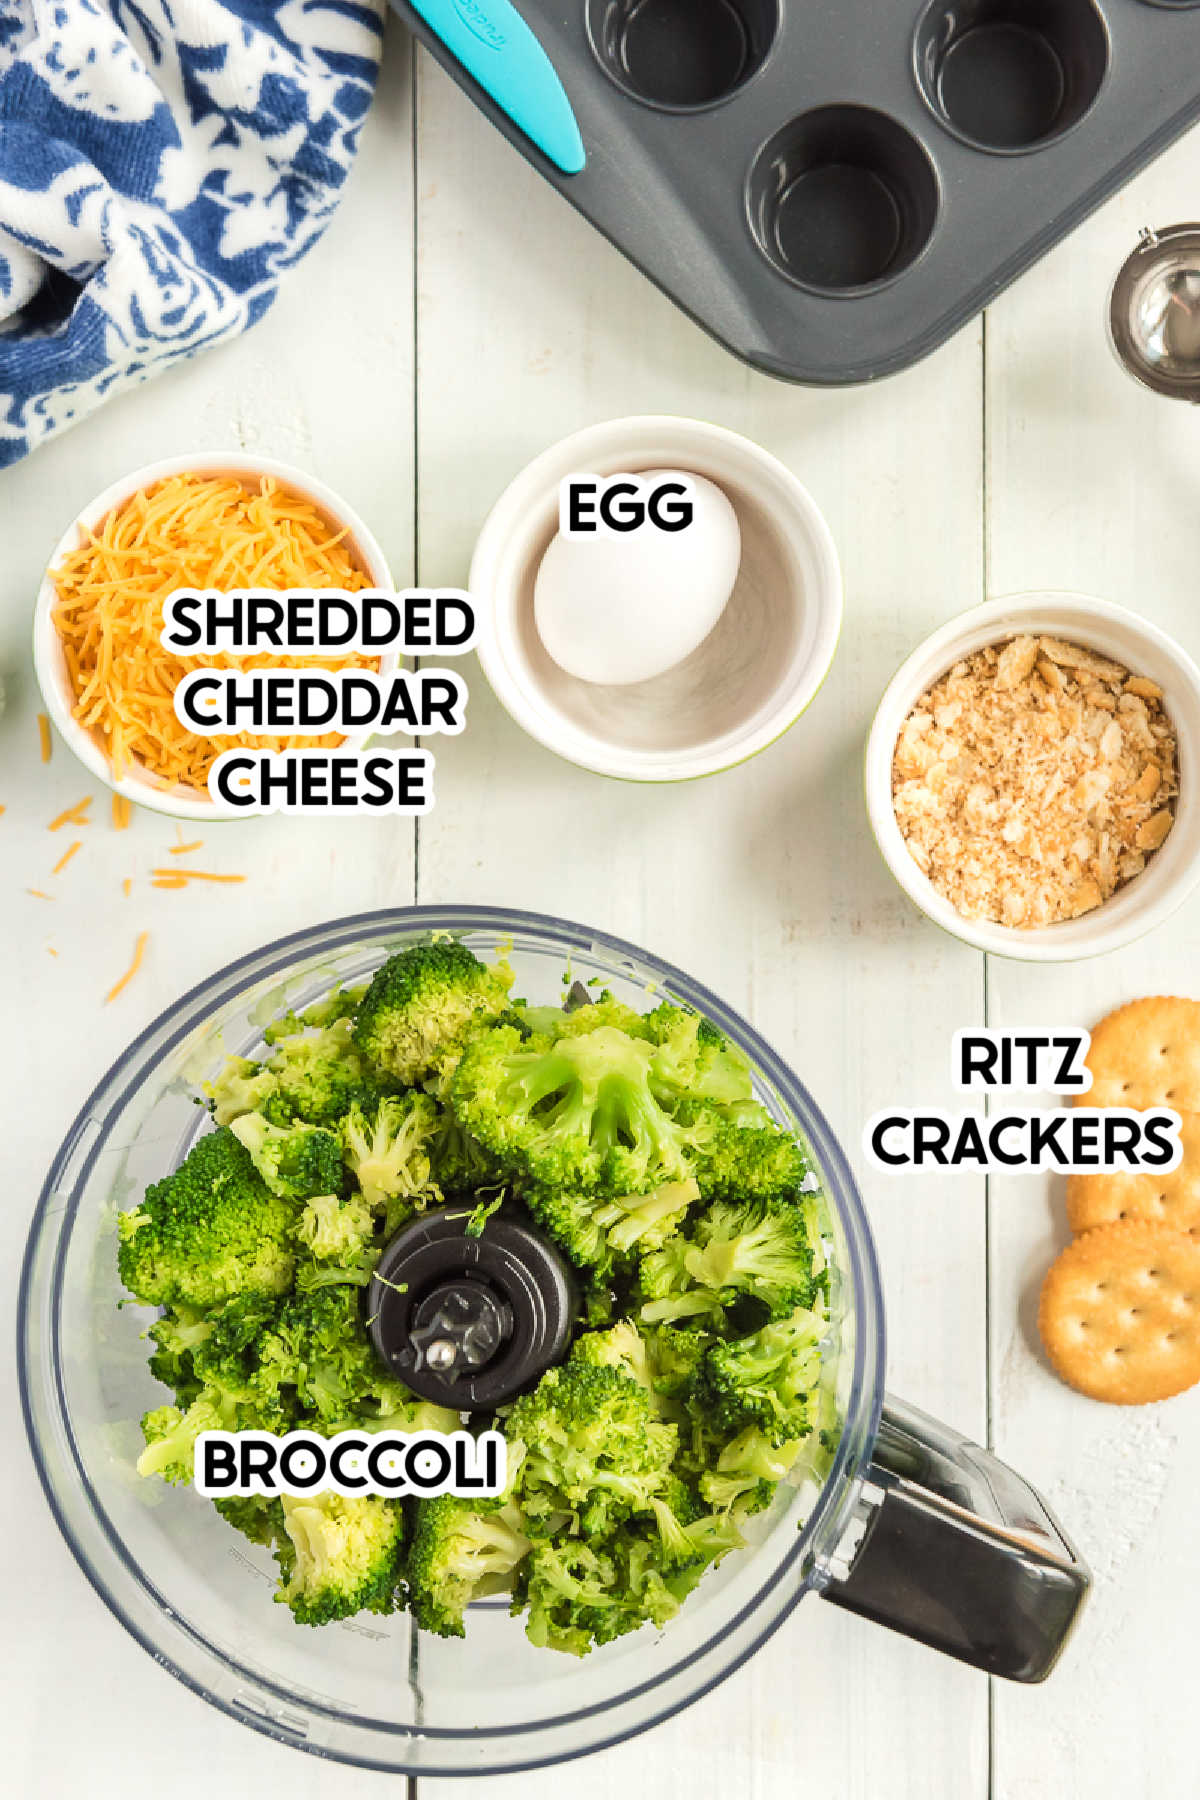 Ingredients to make broccoli bites with labels